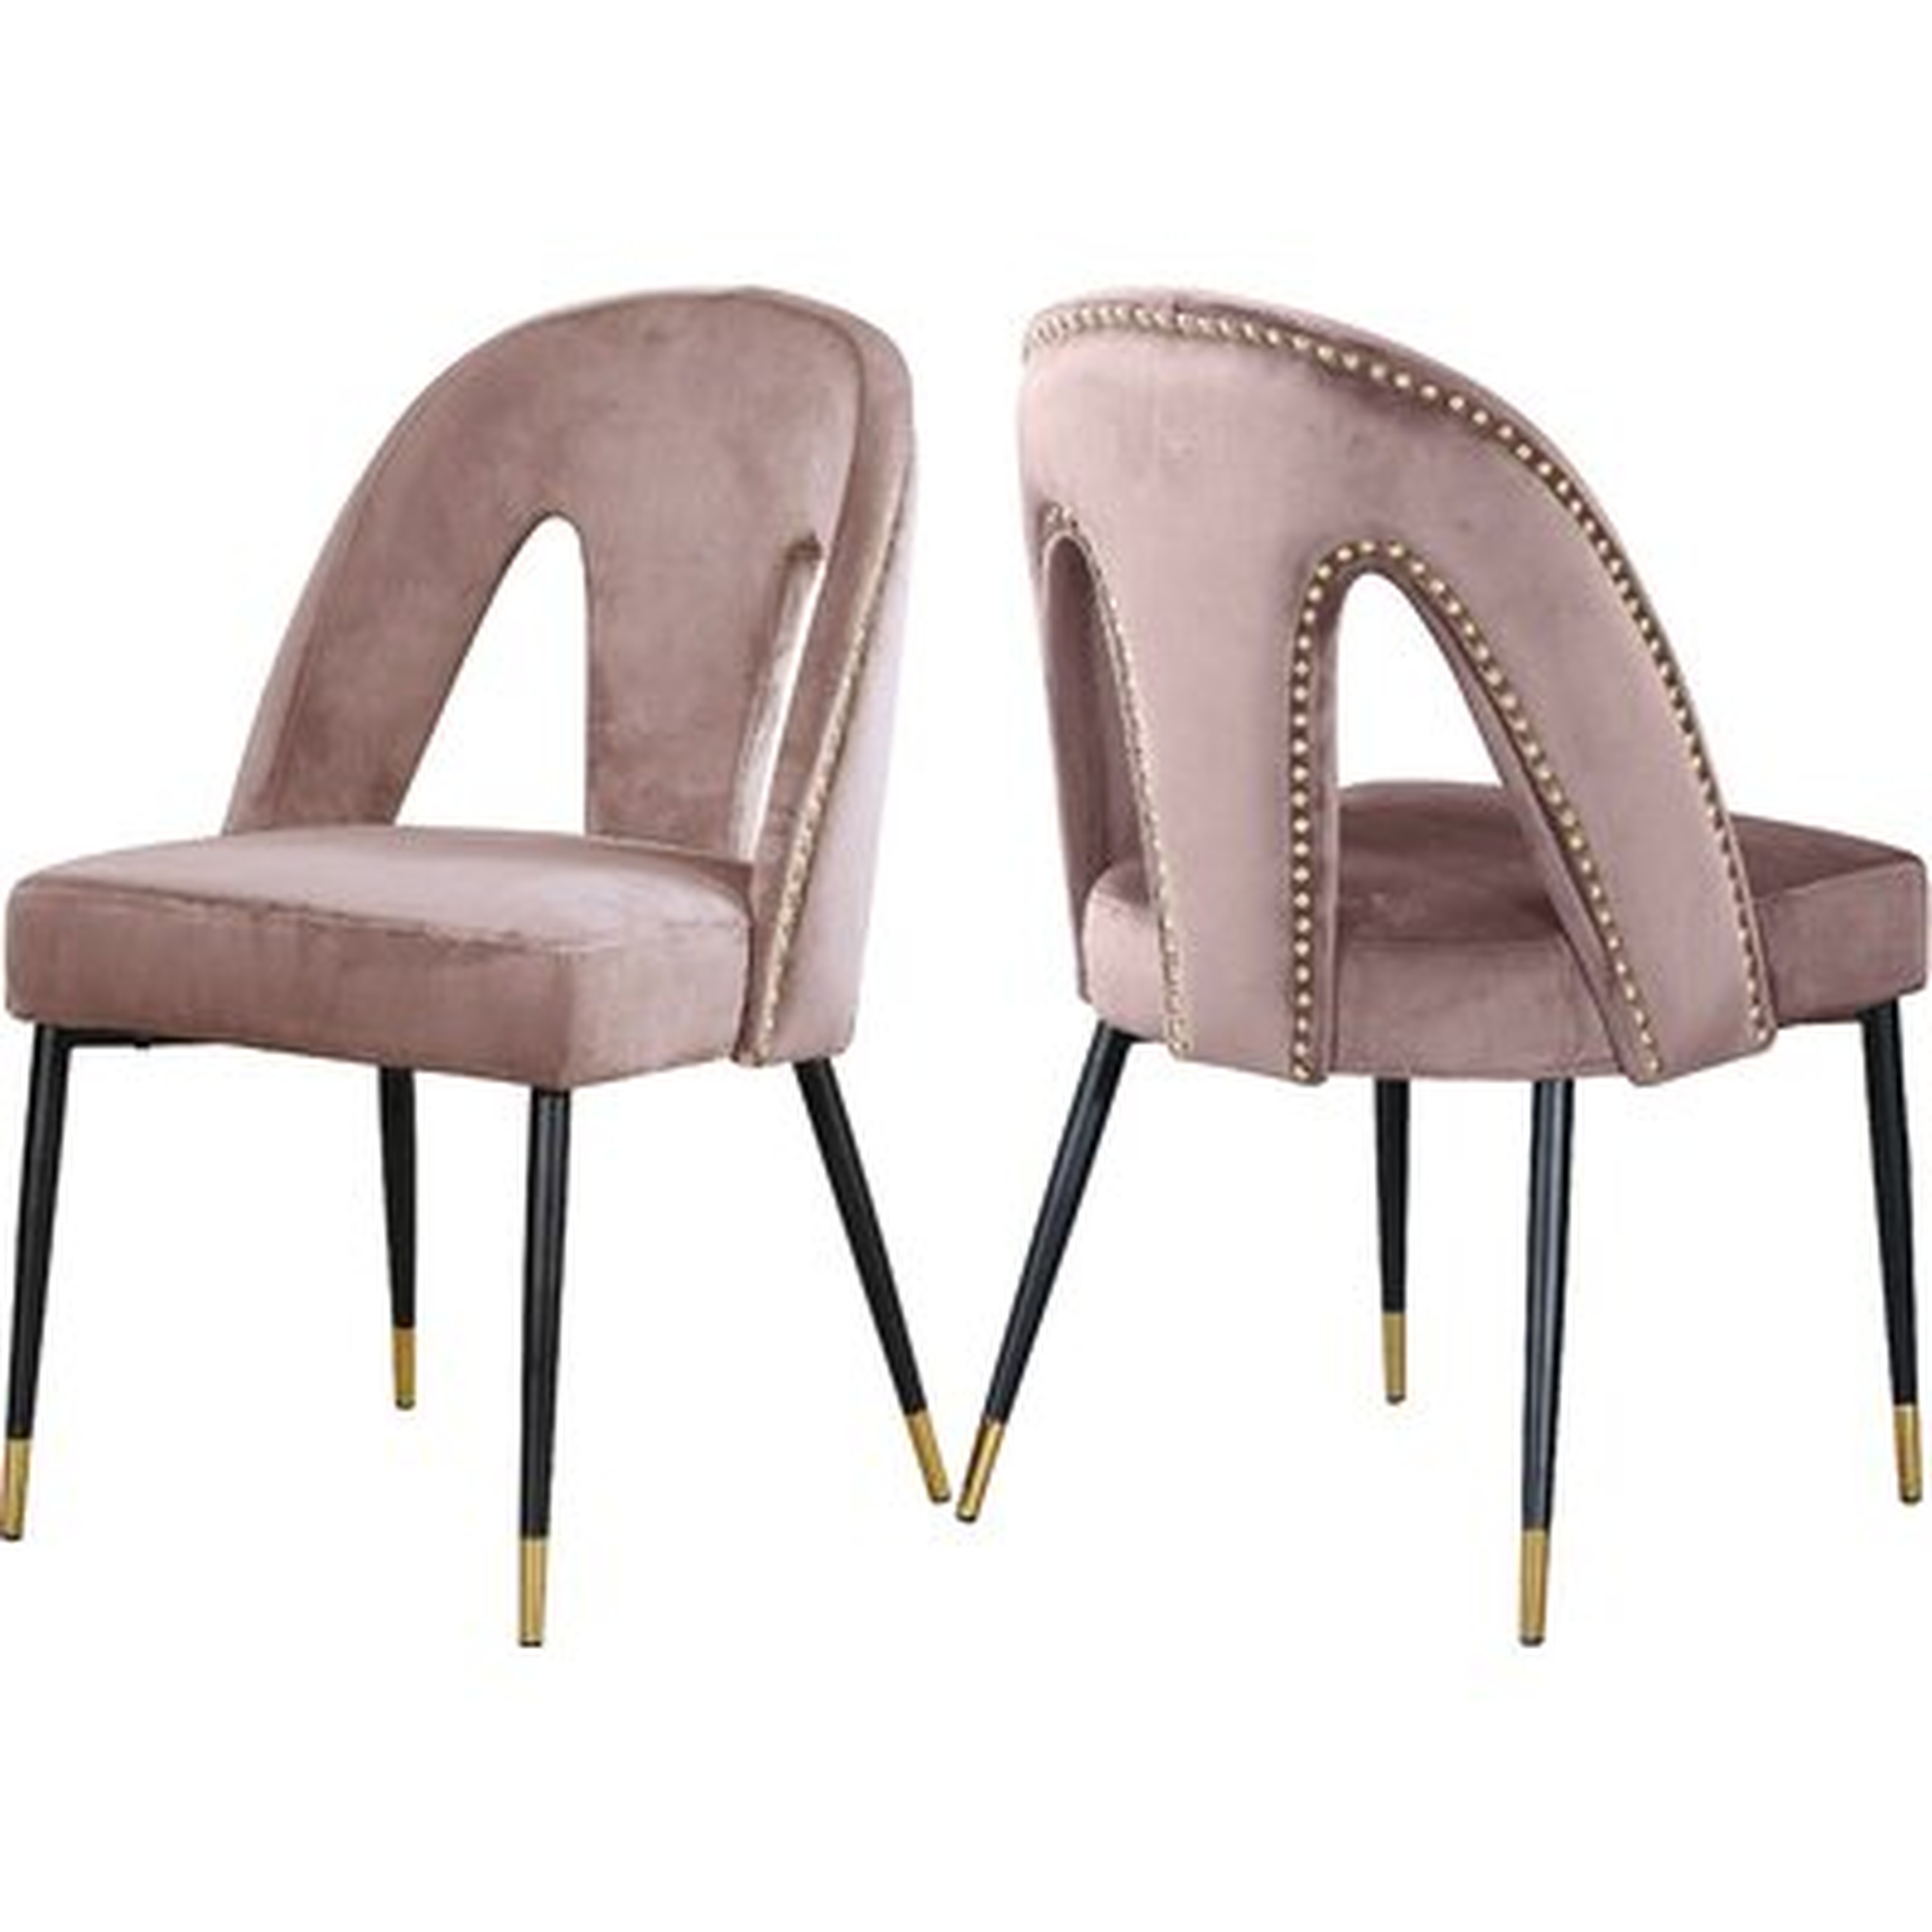 Connor Upholstered Dining Chair - Set of 2 - Wayfair